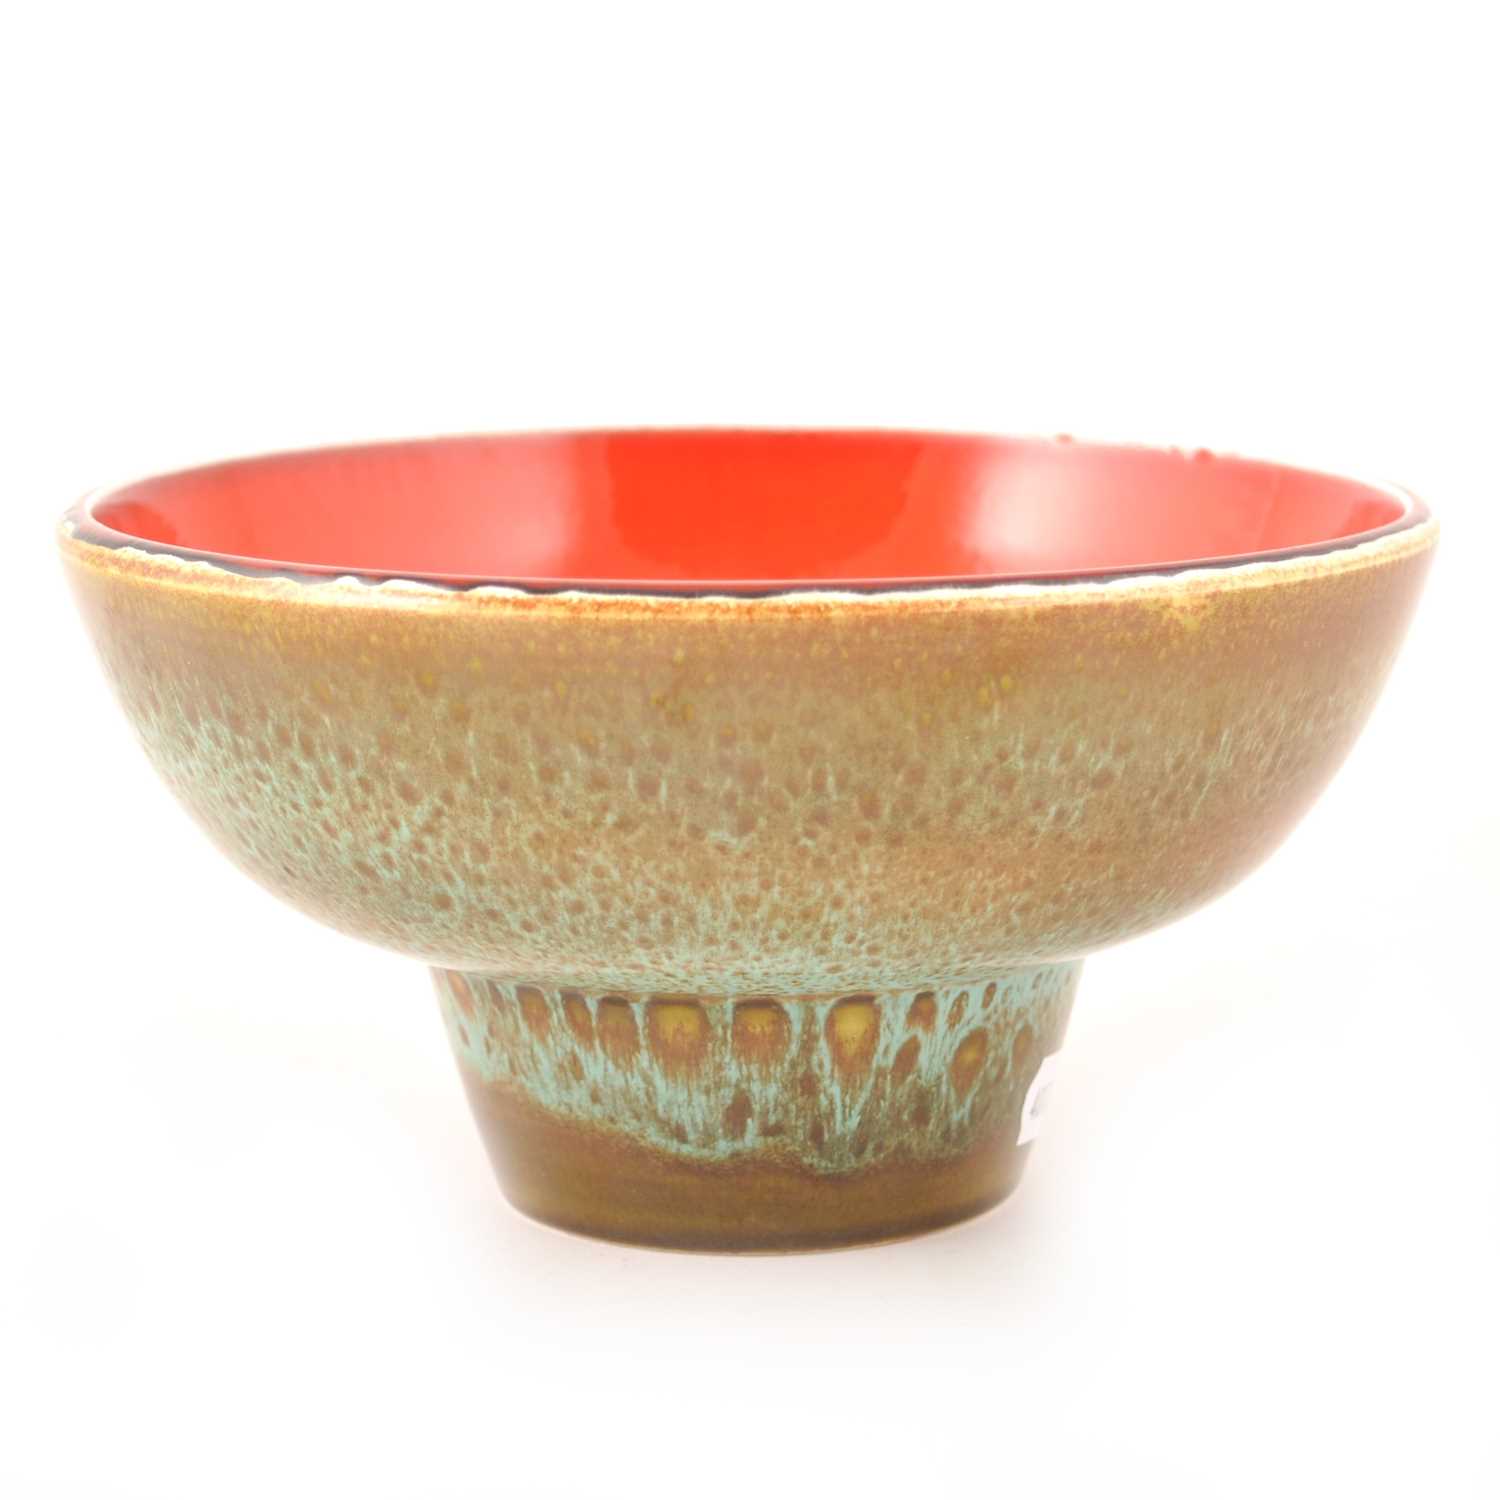 Lot 634 - A 'Delphis' ware footed bowl by Poole Pottery